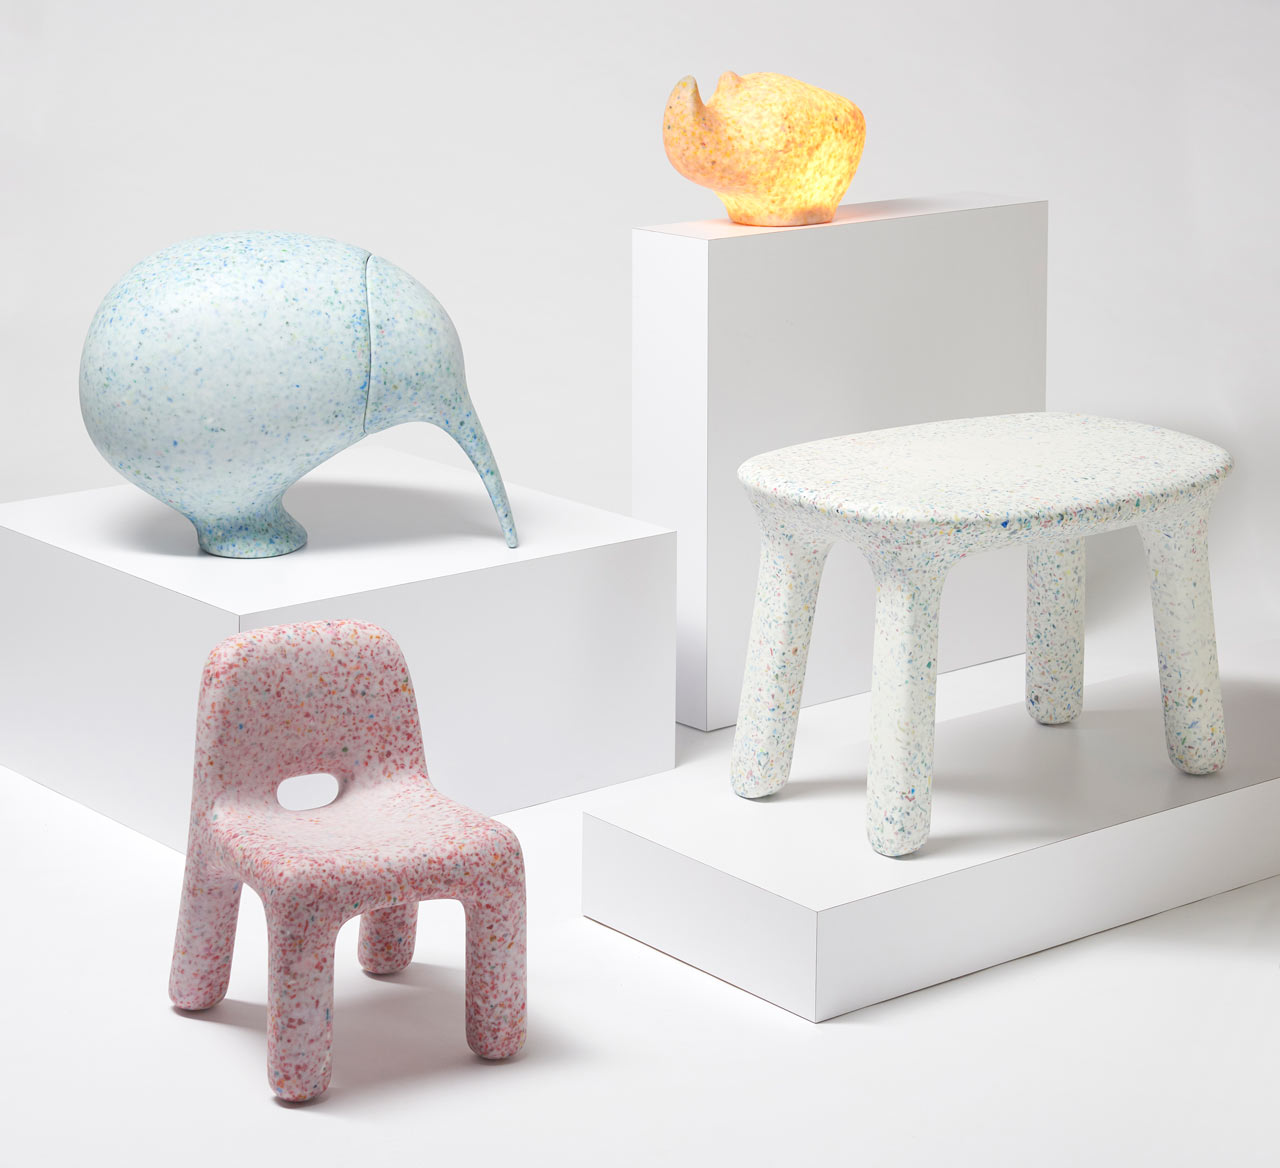 ecoBirdy Creates Kid’s Furniture Made From Old Plastic Toys